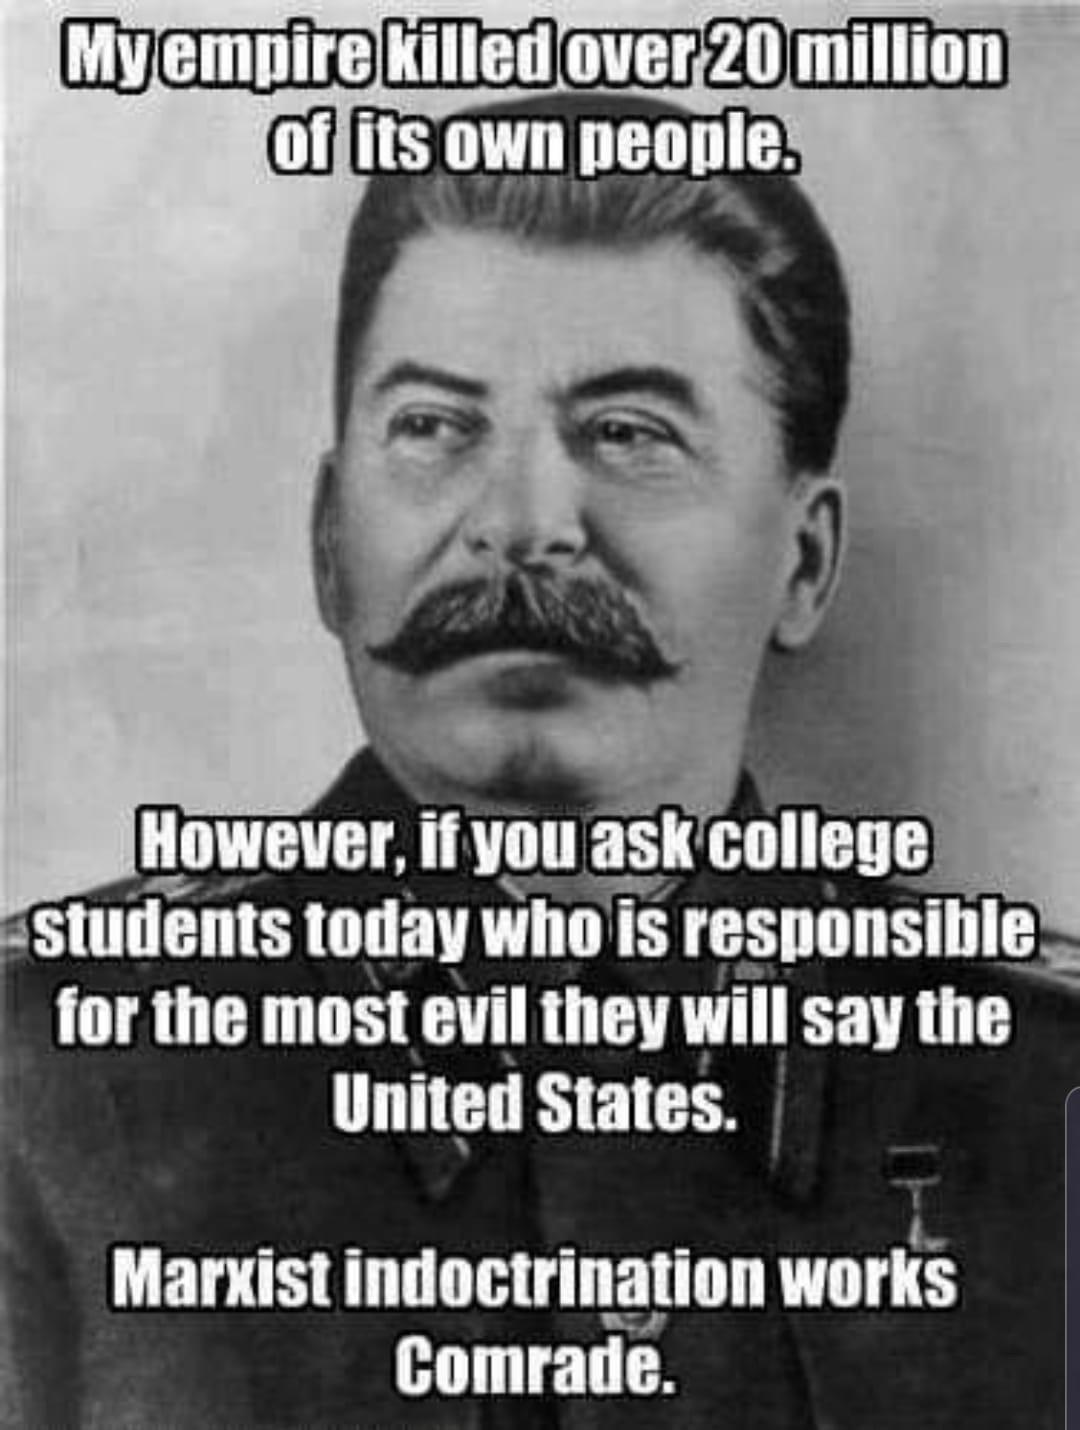 political political-memes political text: MY empire killed over 20 million of its own people. However, if you ask college •students today who is responsible for the most evil they will say the United States. Marxist indoctrination works Comrade. 